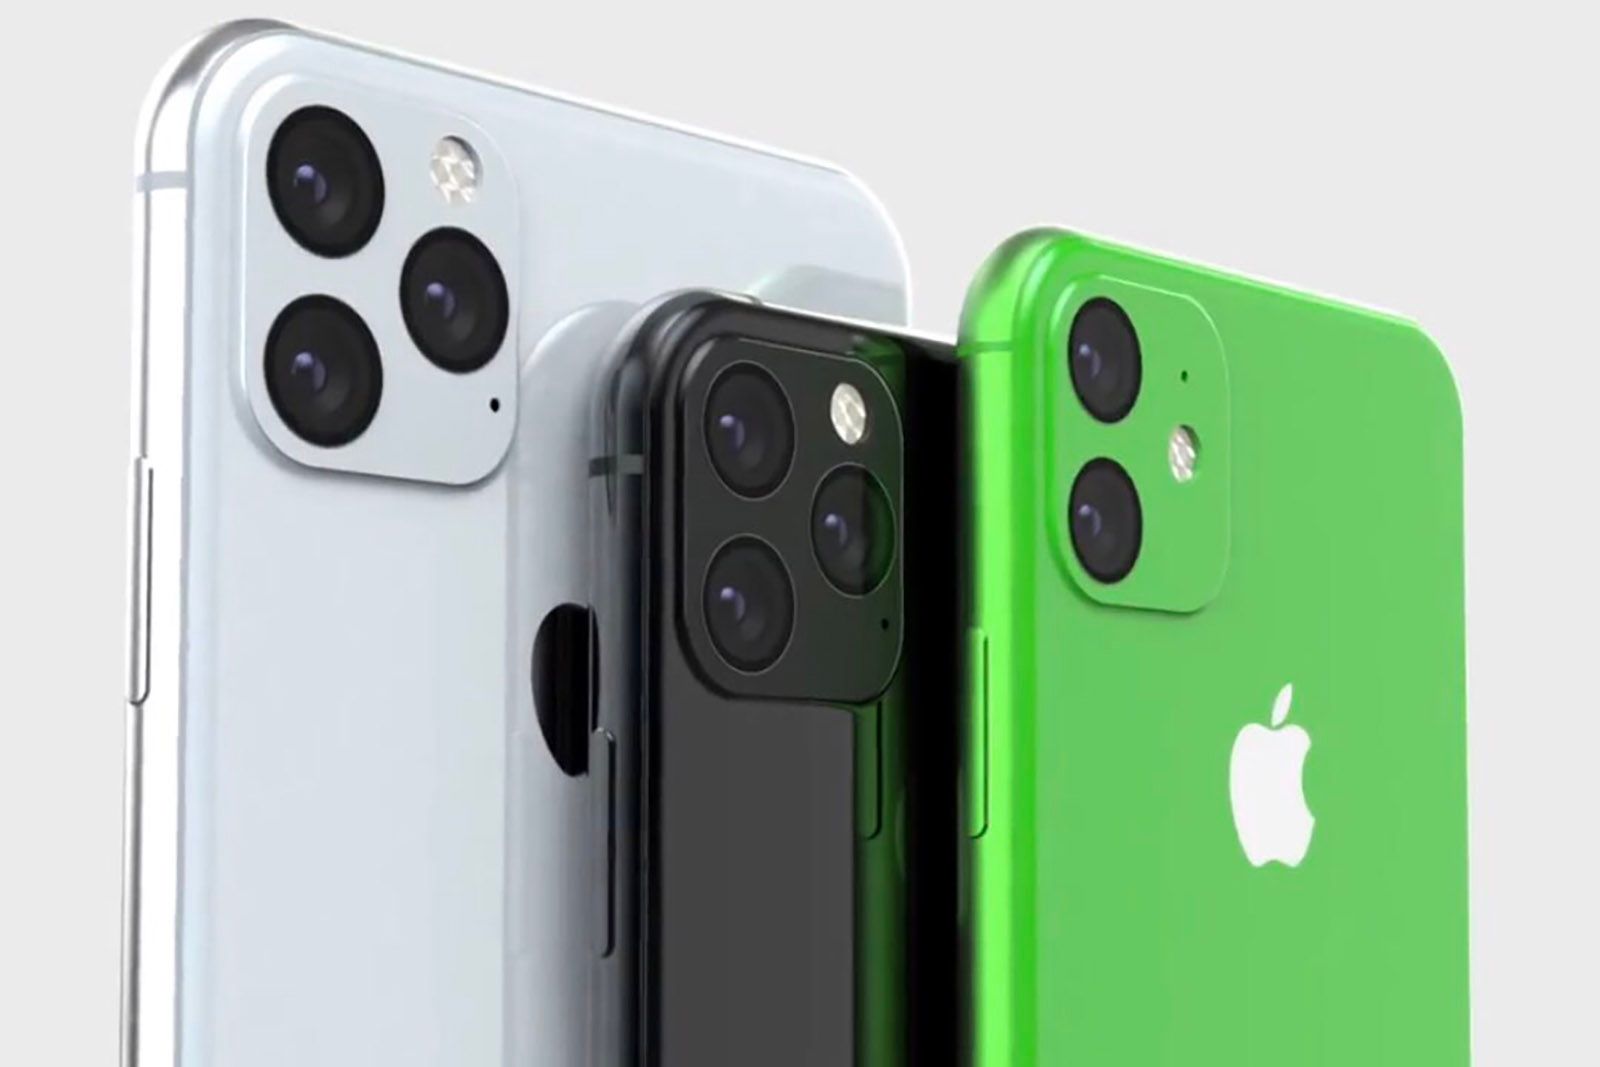 Apple Iphone Xi To Get Dual Bluetooth Streaming Support Claims Report image 1